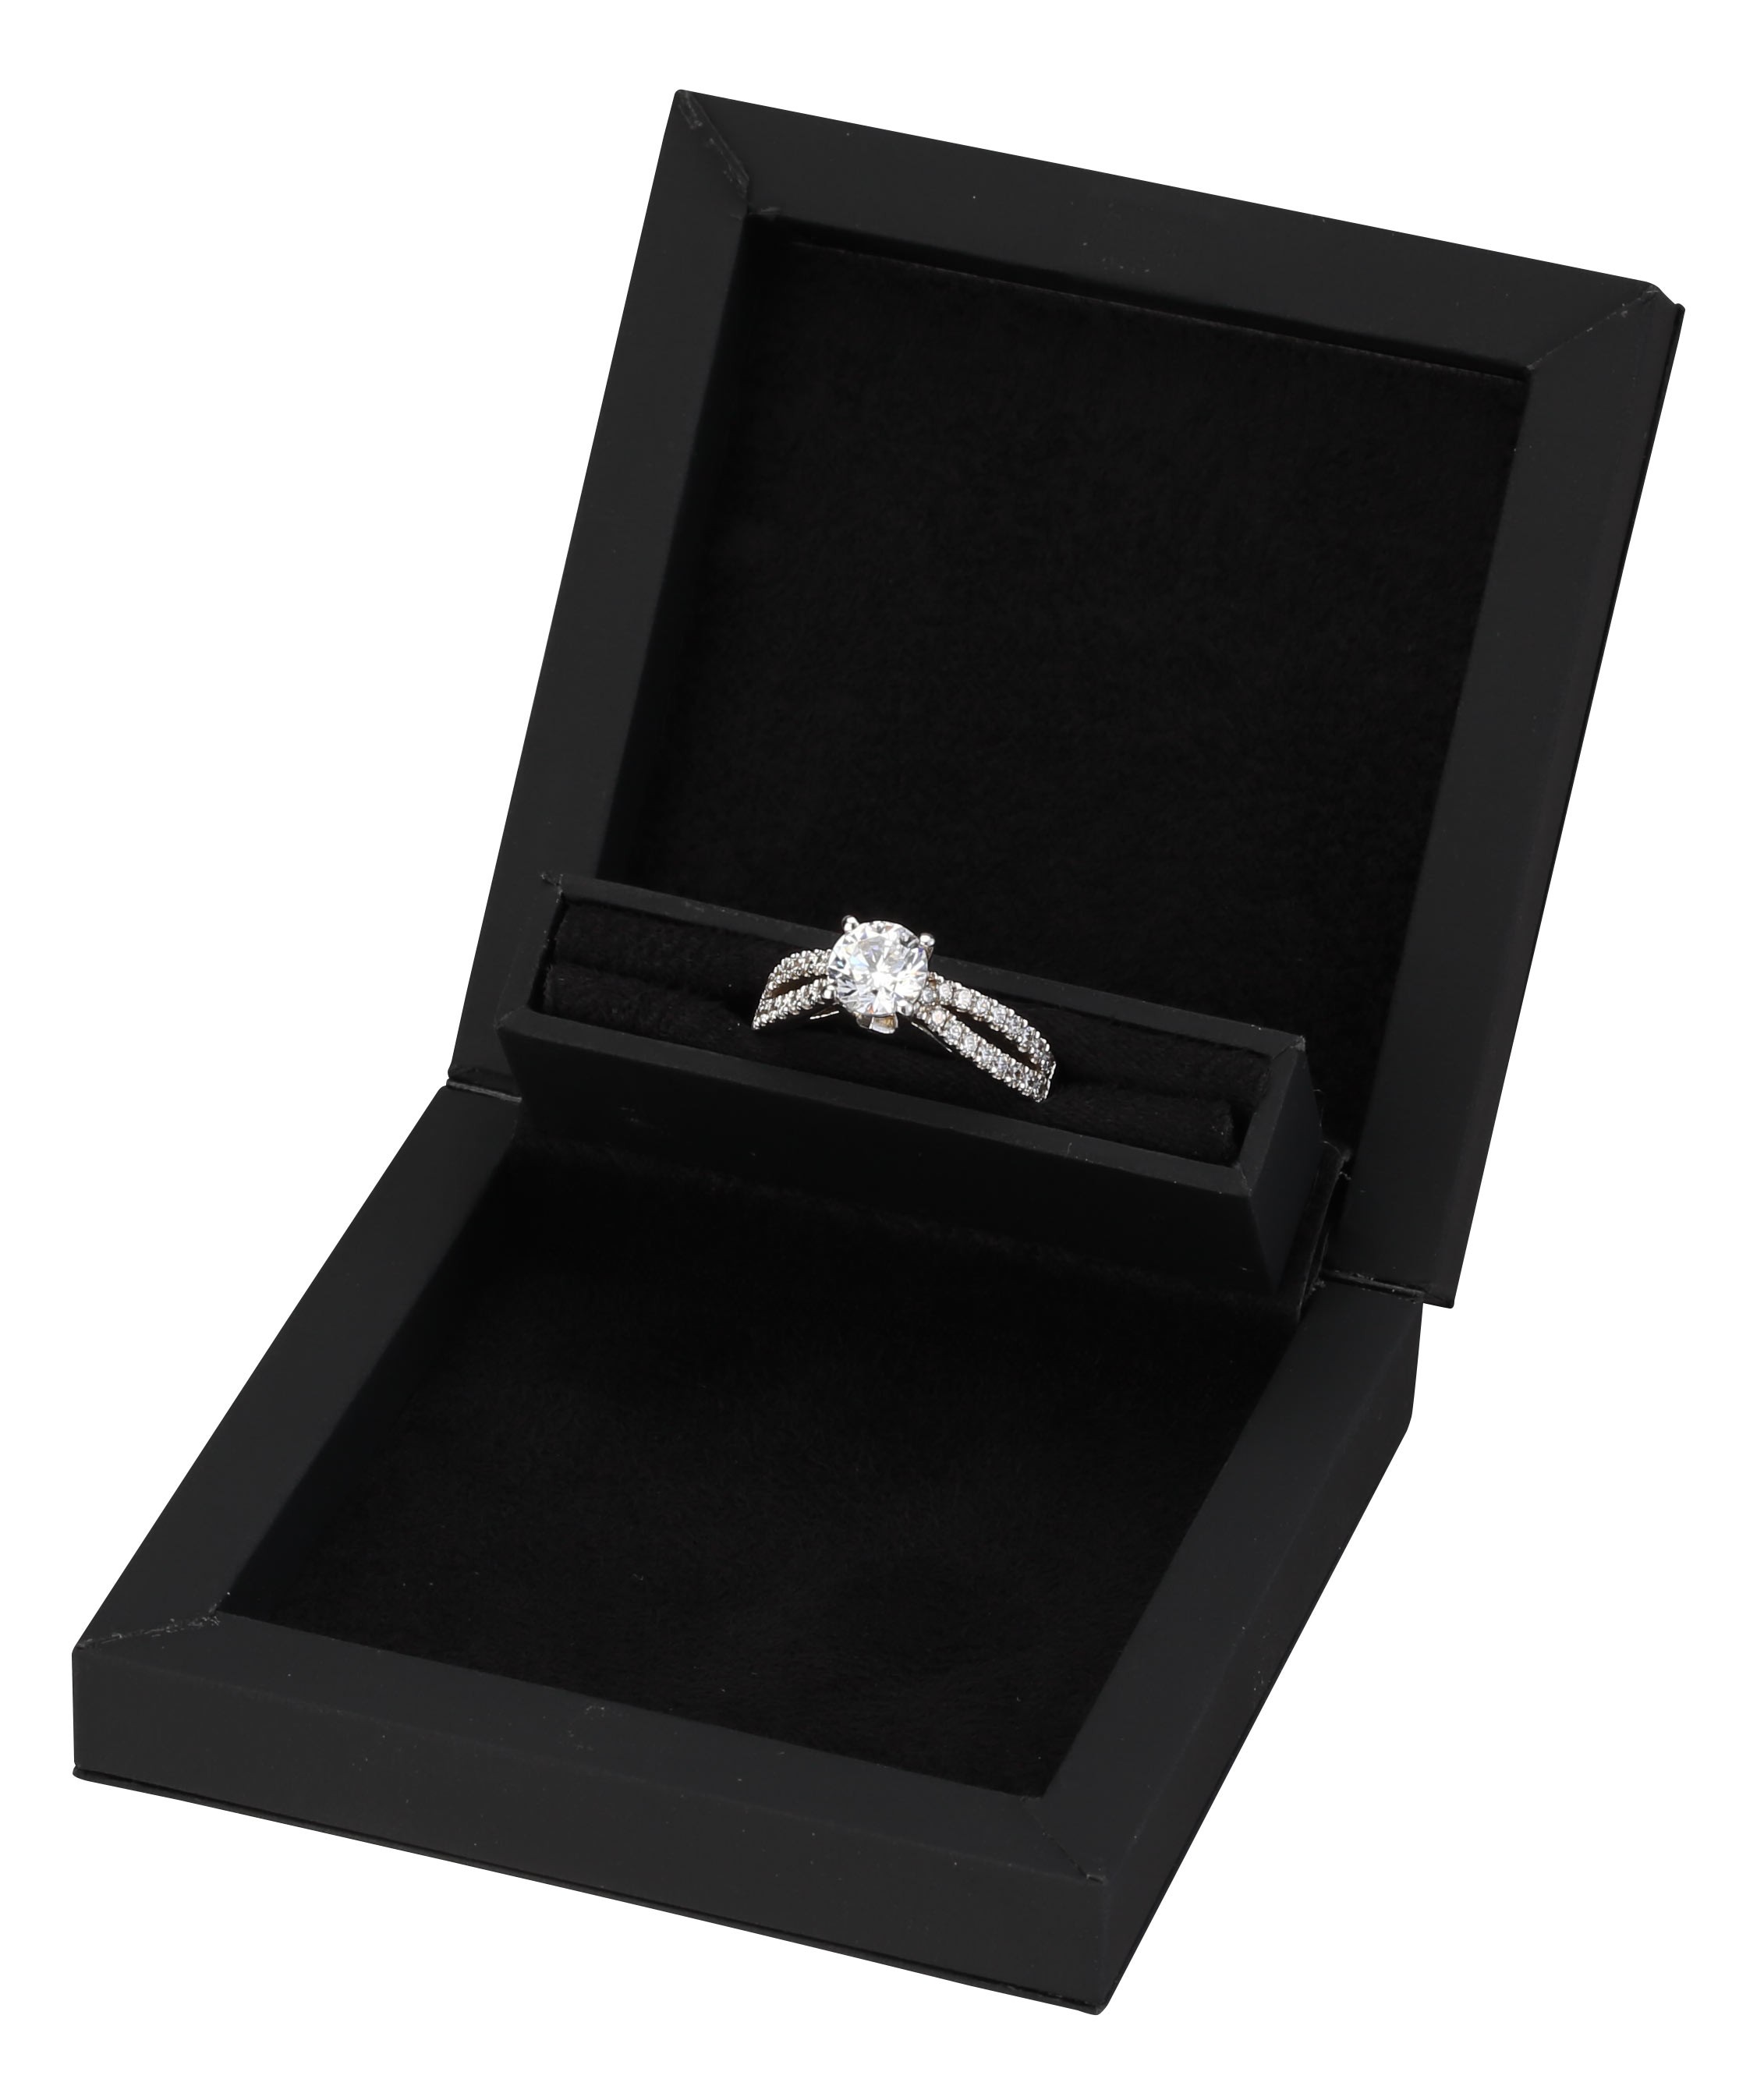 A&A Jewelry Supply - Stealth Proposal Ring Slot Box in Matte Black